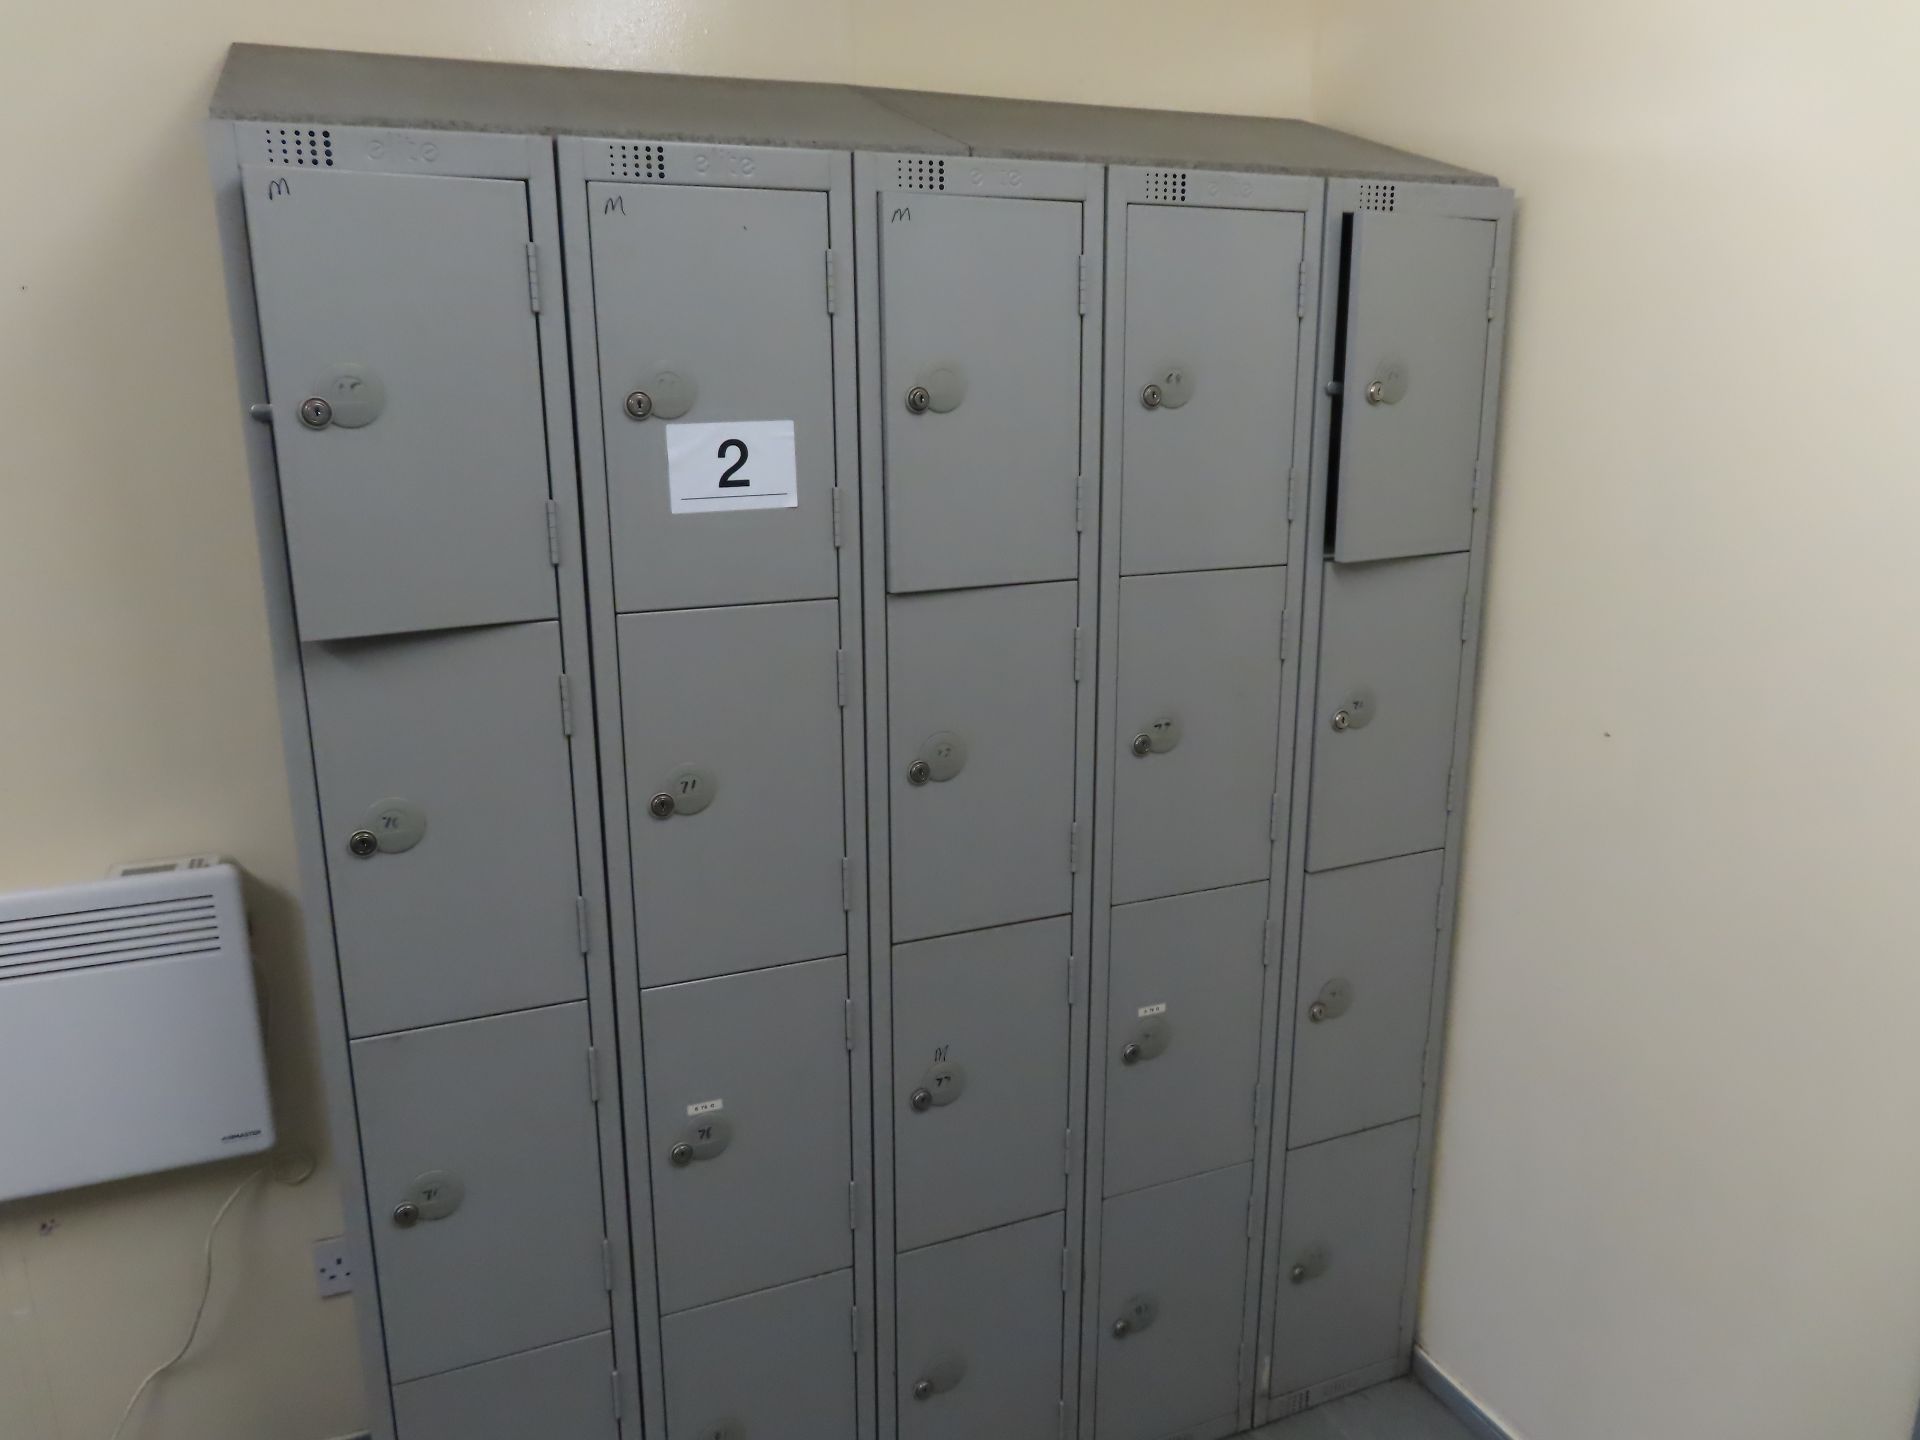 5 X BANKS OF LOCKERS WITH KEYS